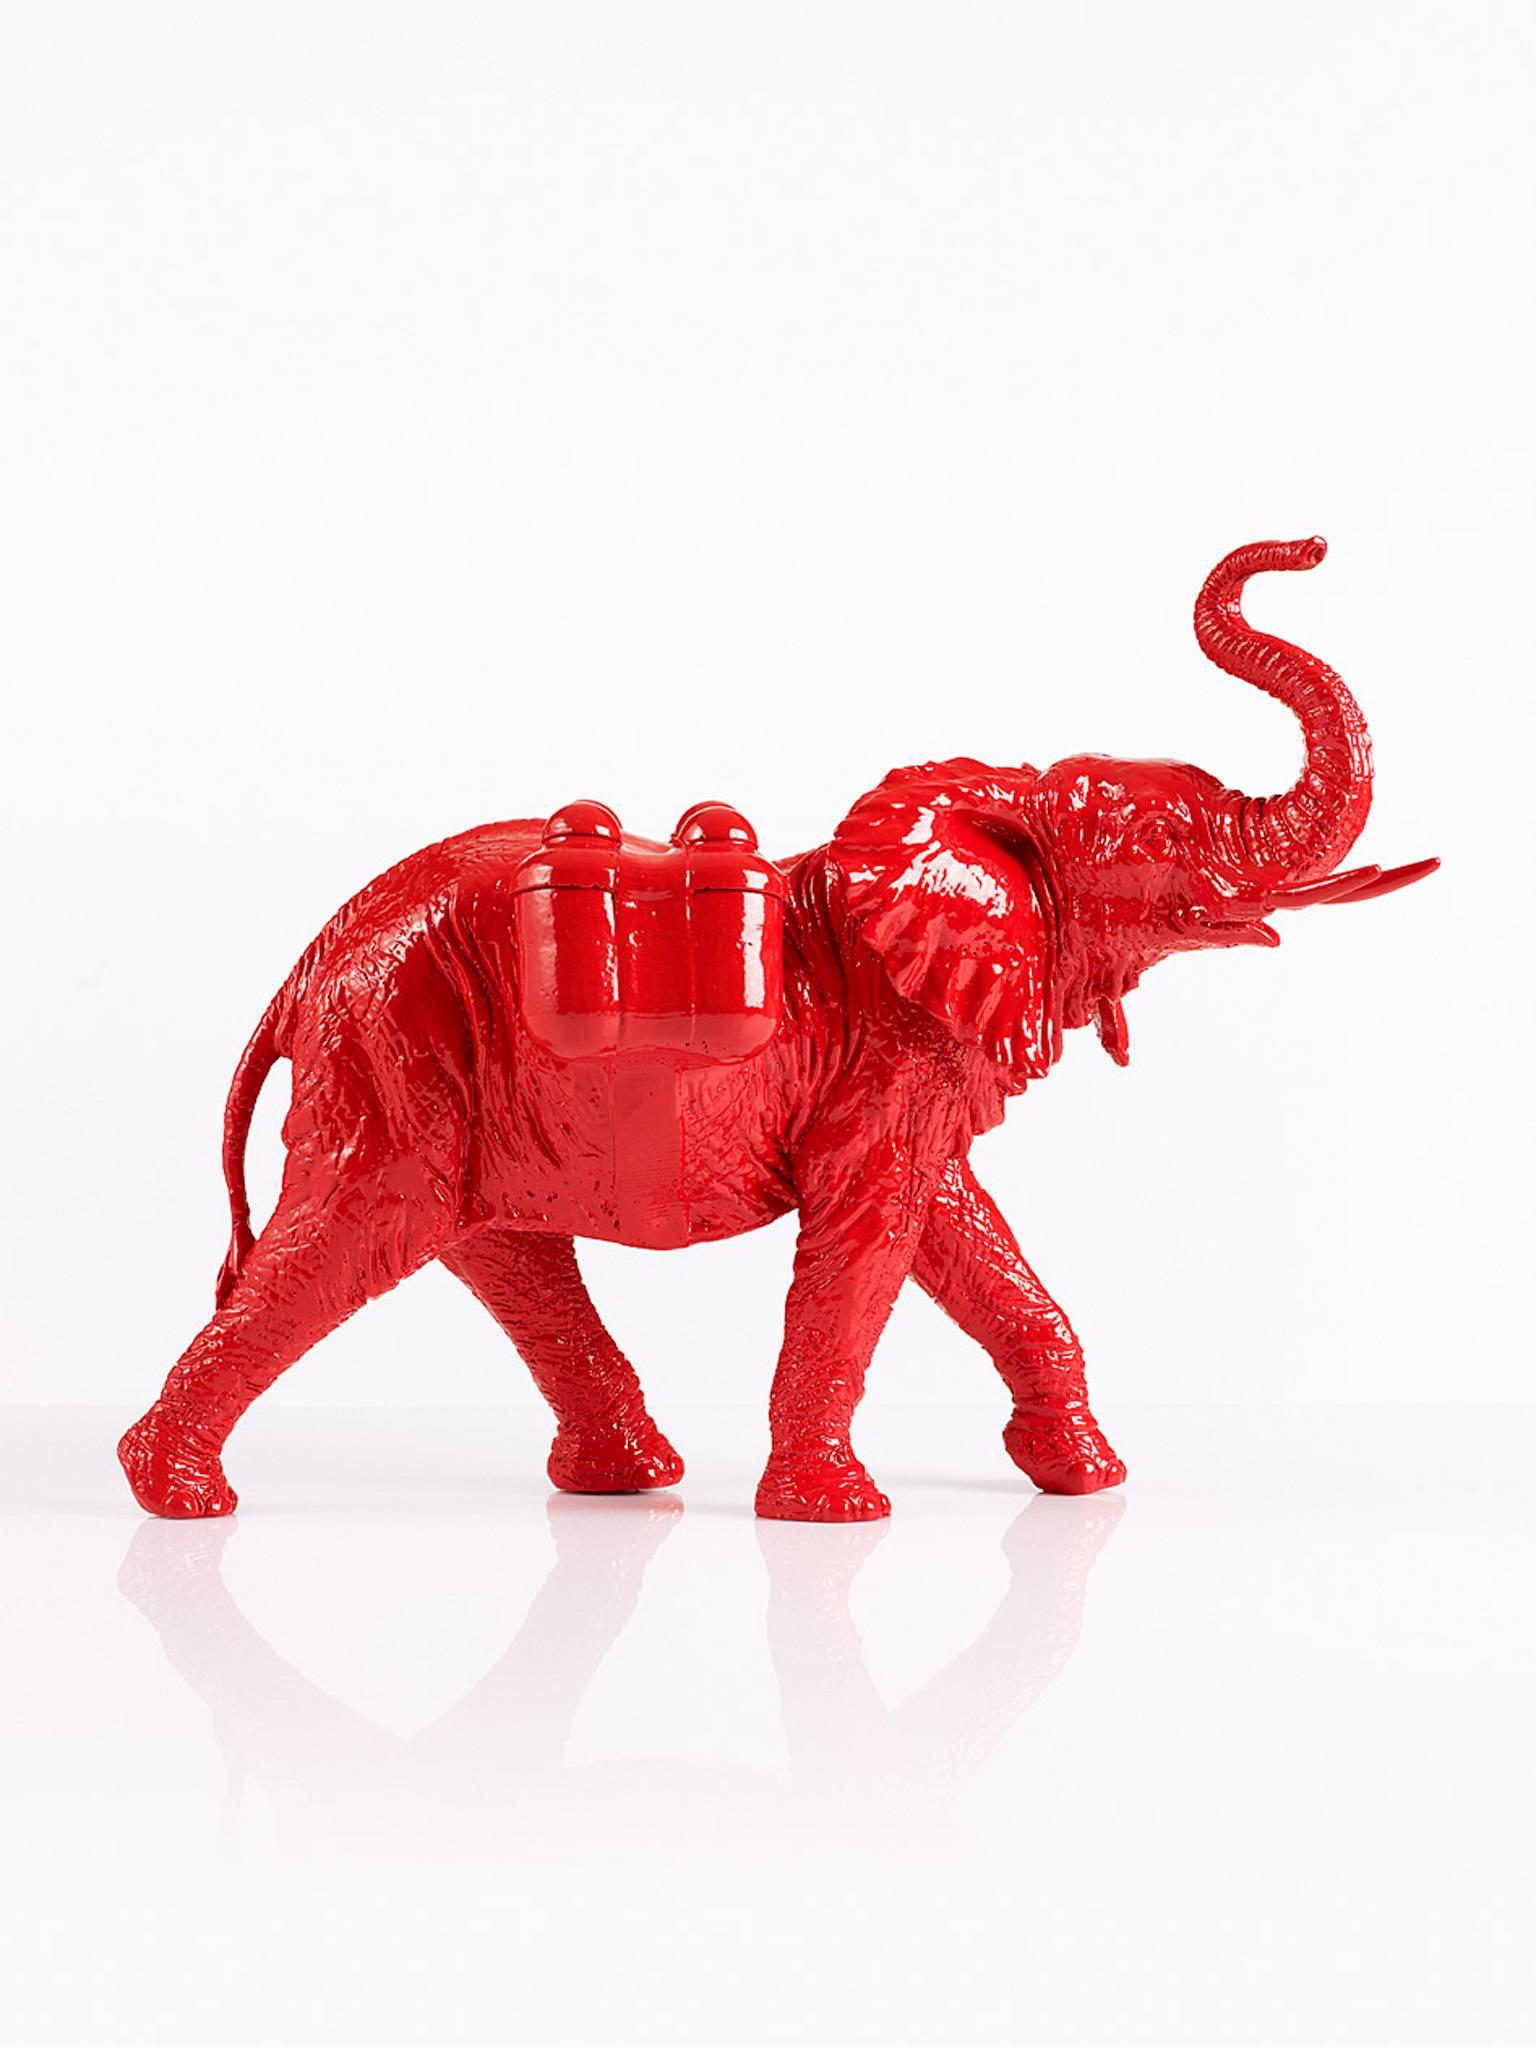 Cloned red Elephant with Waterpacks - Sculpture by William Sweetlove